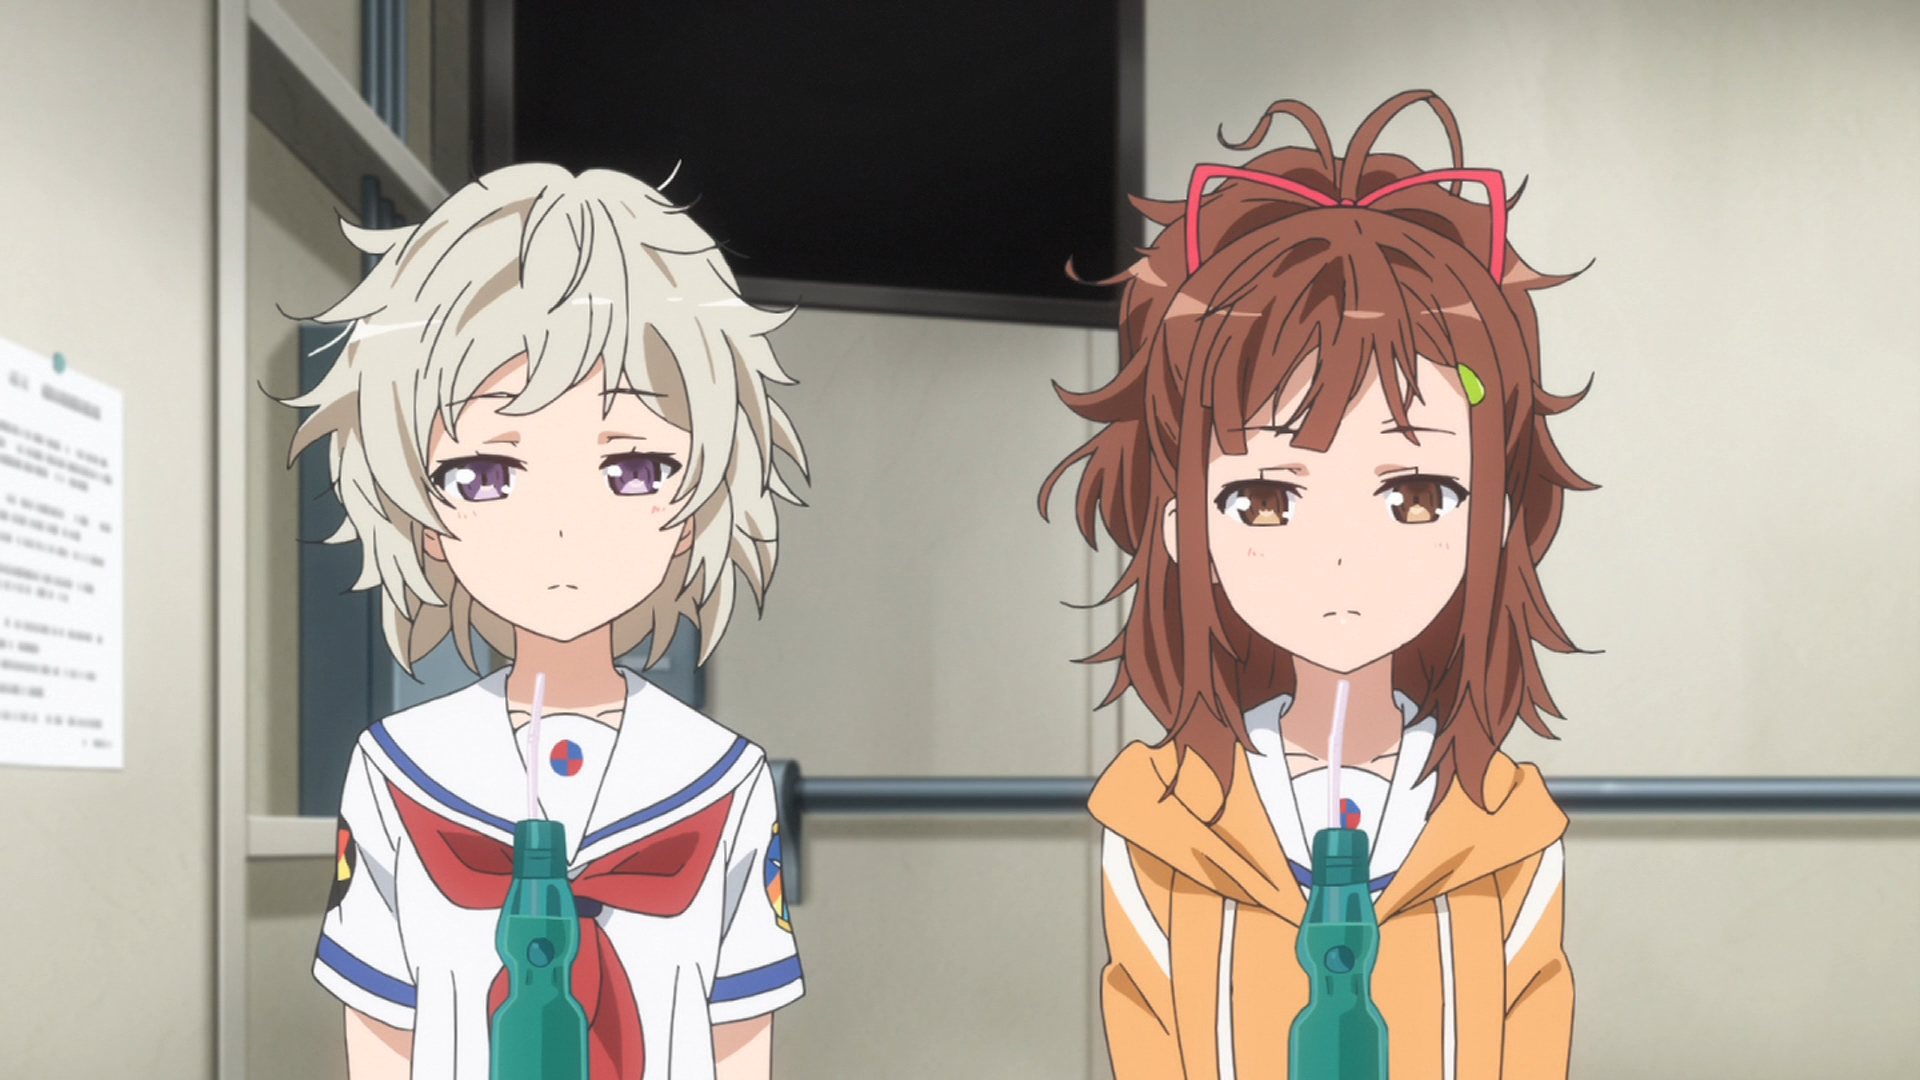 Artillery officer Shima Tateishi and torpedo officer Mei Irizaki suffer from a terrible case of bedhead while sipping on bottles of ramune during a ship-wide water shortage in a scene from the 2016 High School Fleet TV anime.